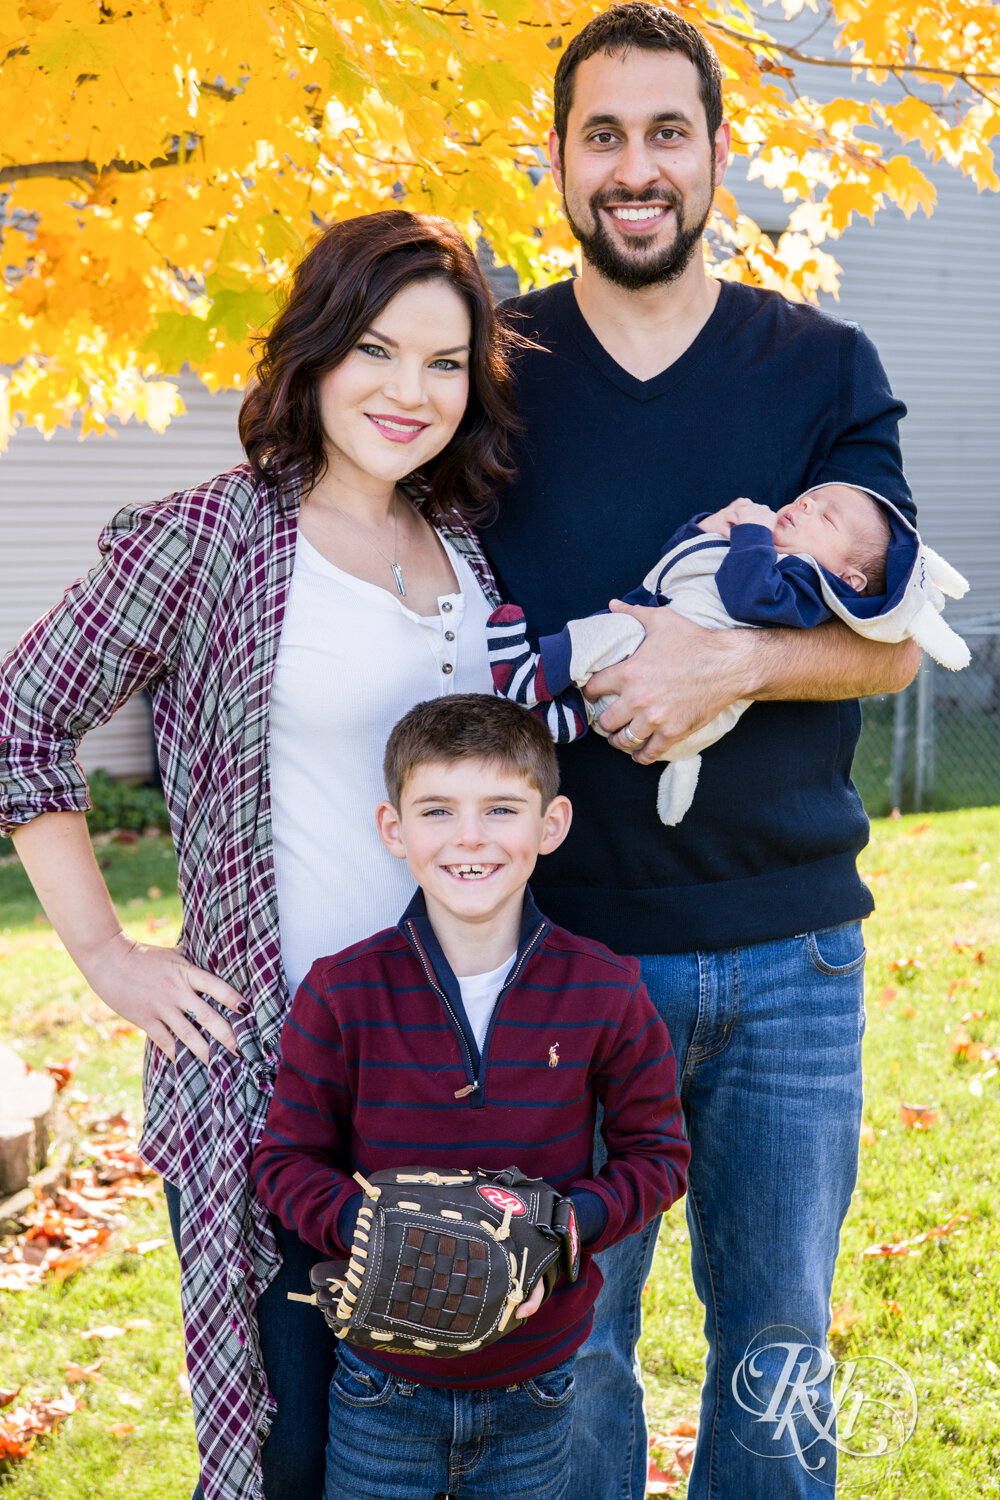 Mom, dad, son and baby smiling in yard with fall colors in Minnesota.